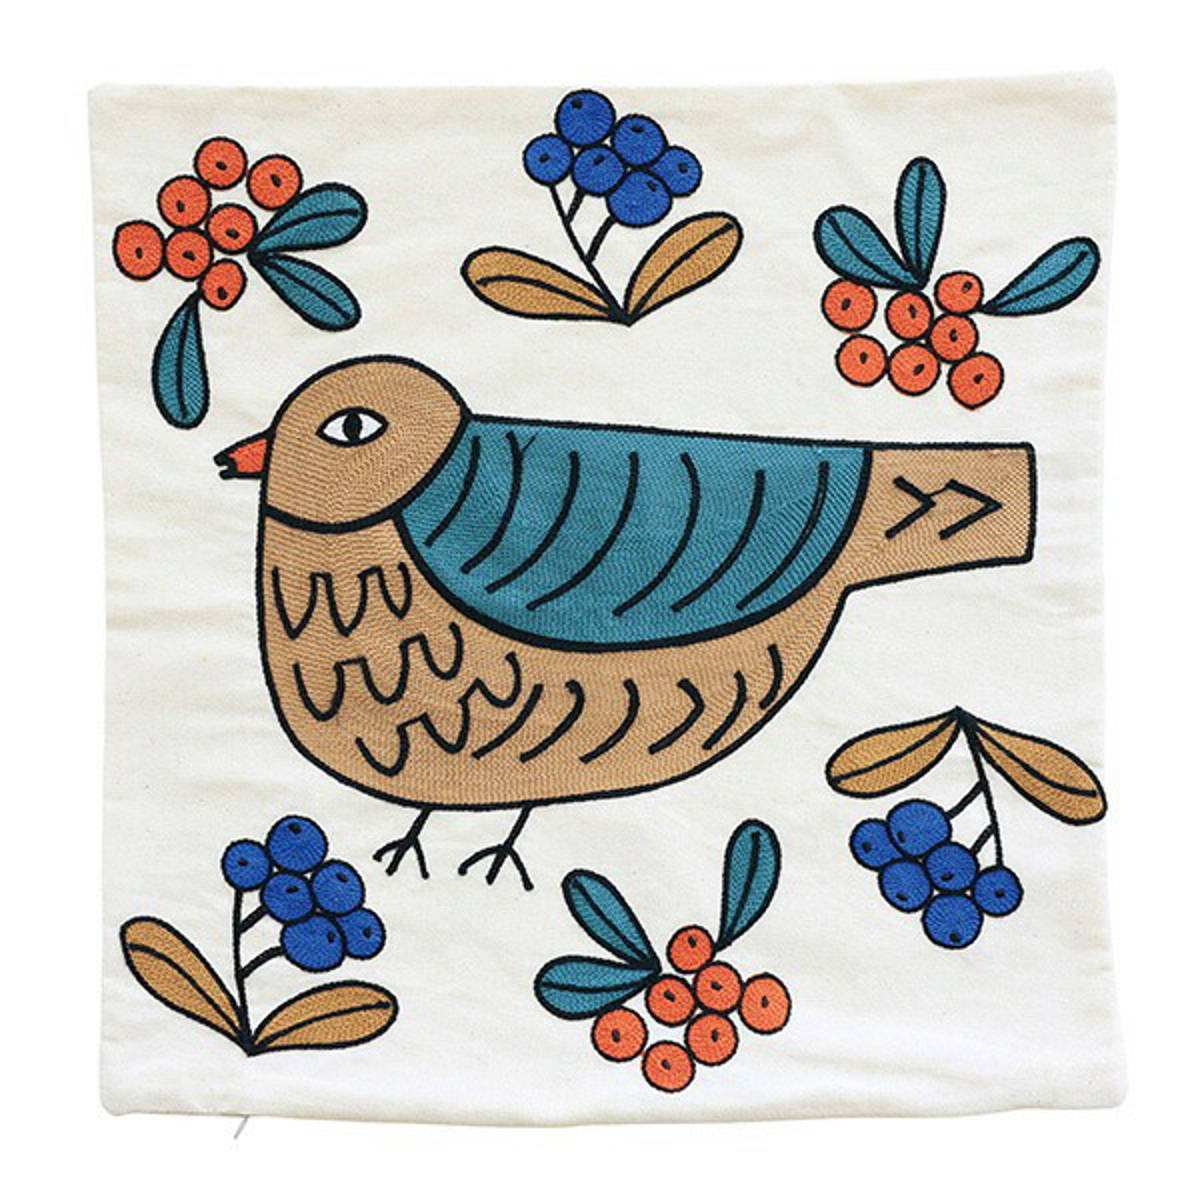 NbVJo[ ~L Embroidery Cushioncover 45×45cm i hJ GuC_[ 45cm ` NbV Jo[ ւJo[ lp  ˂ 킢  L   CeA G I[V[Y j yChubbyBirdz